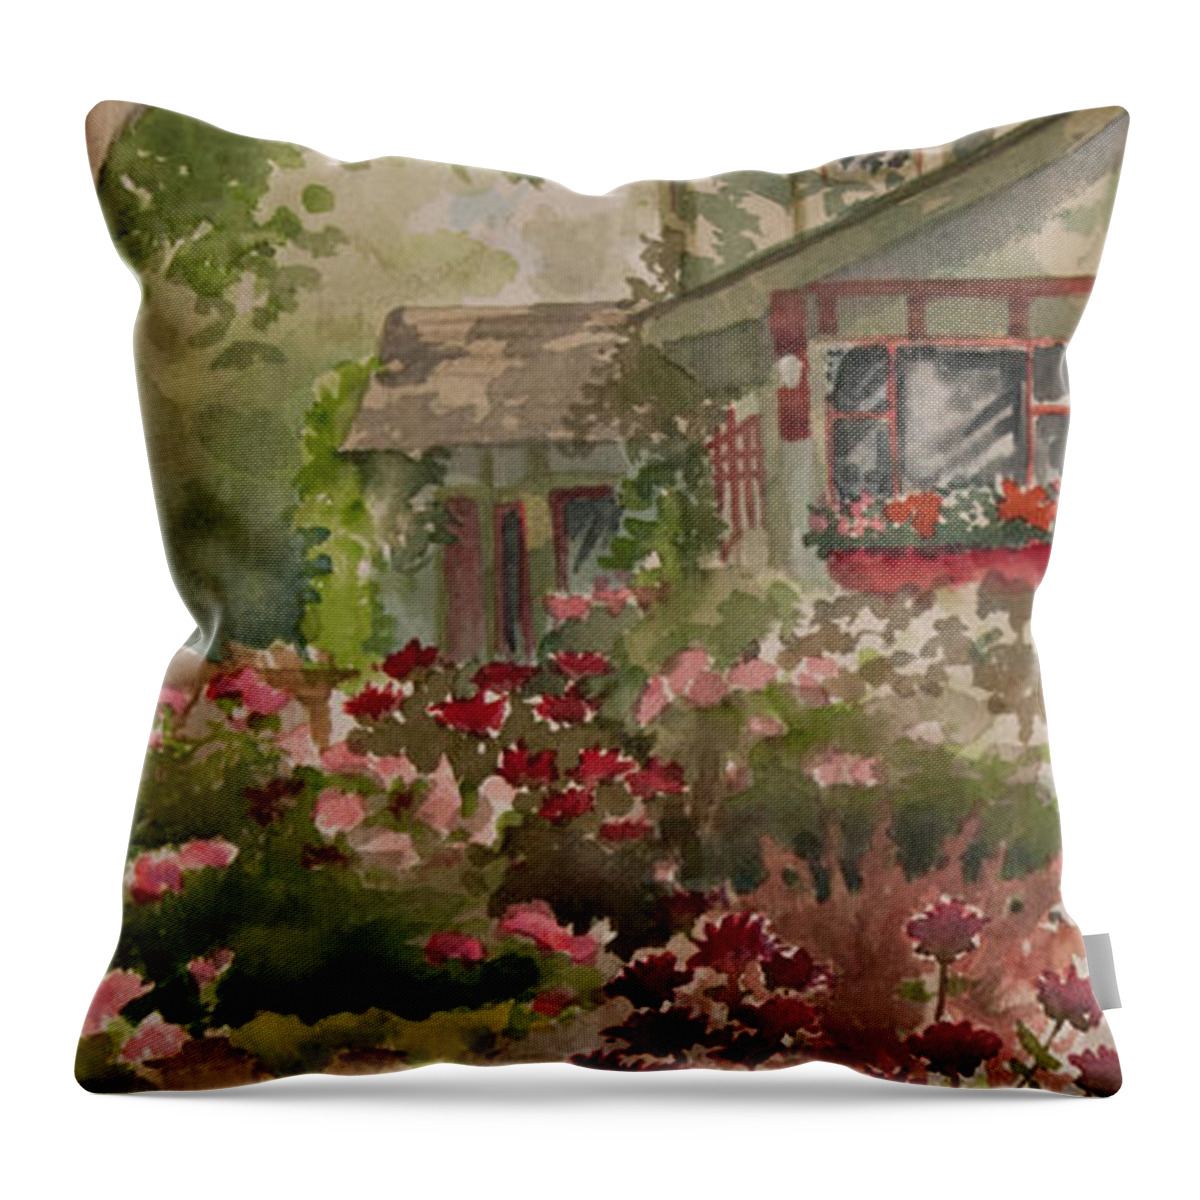 Landscape Throw Pillow featuring the painting Johnson Street Gem by Heidi E Nelson